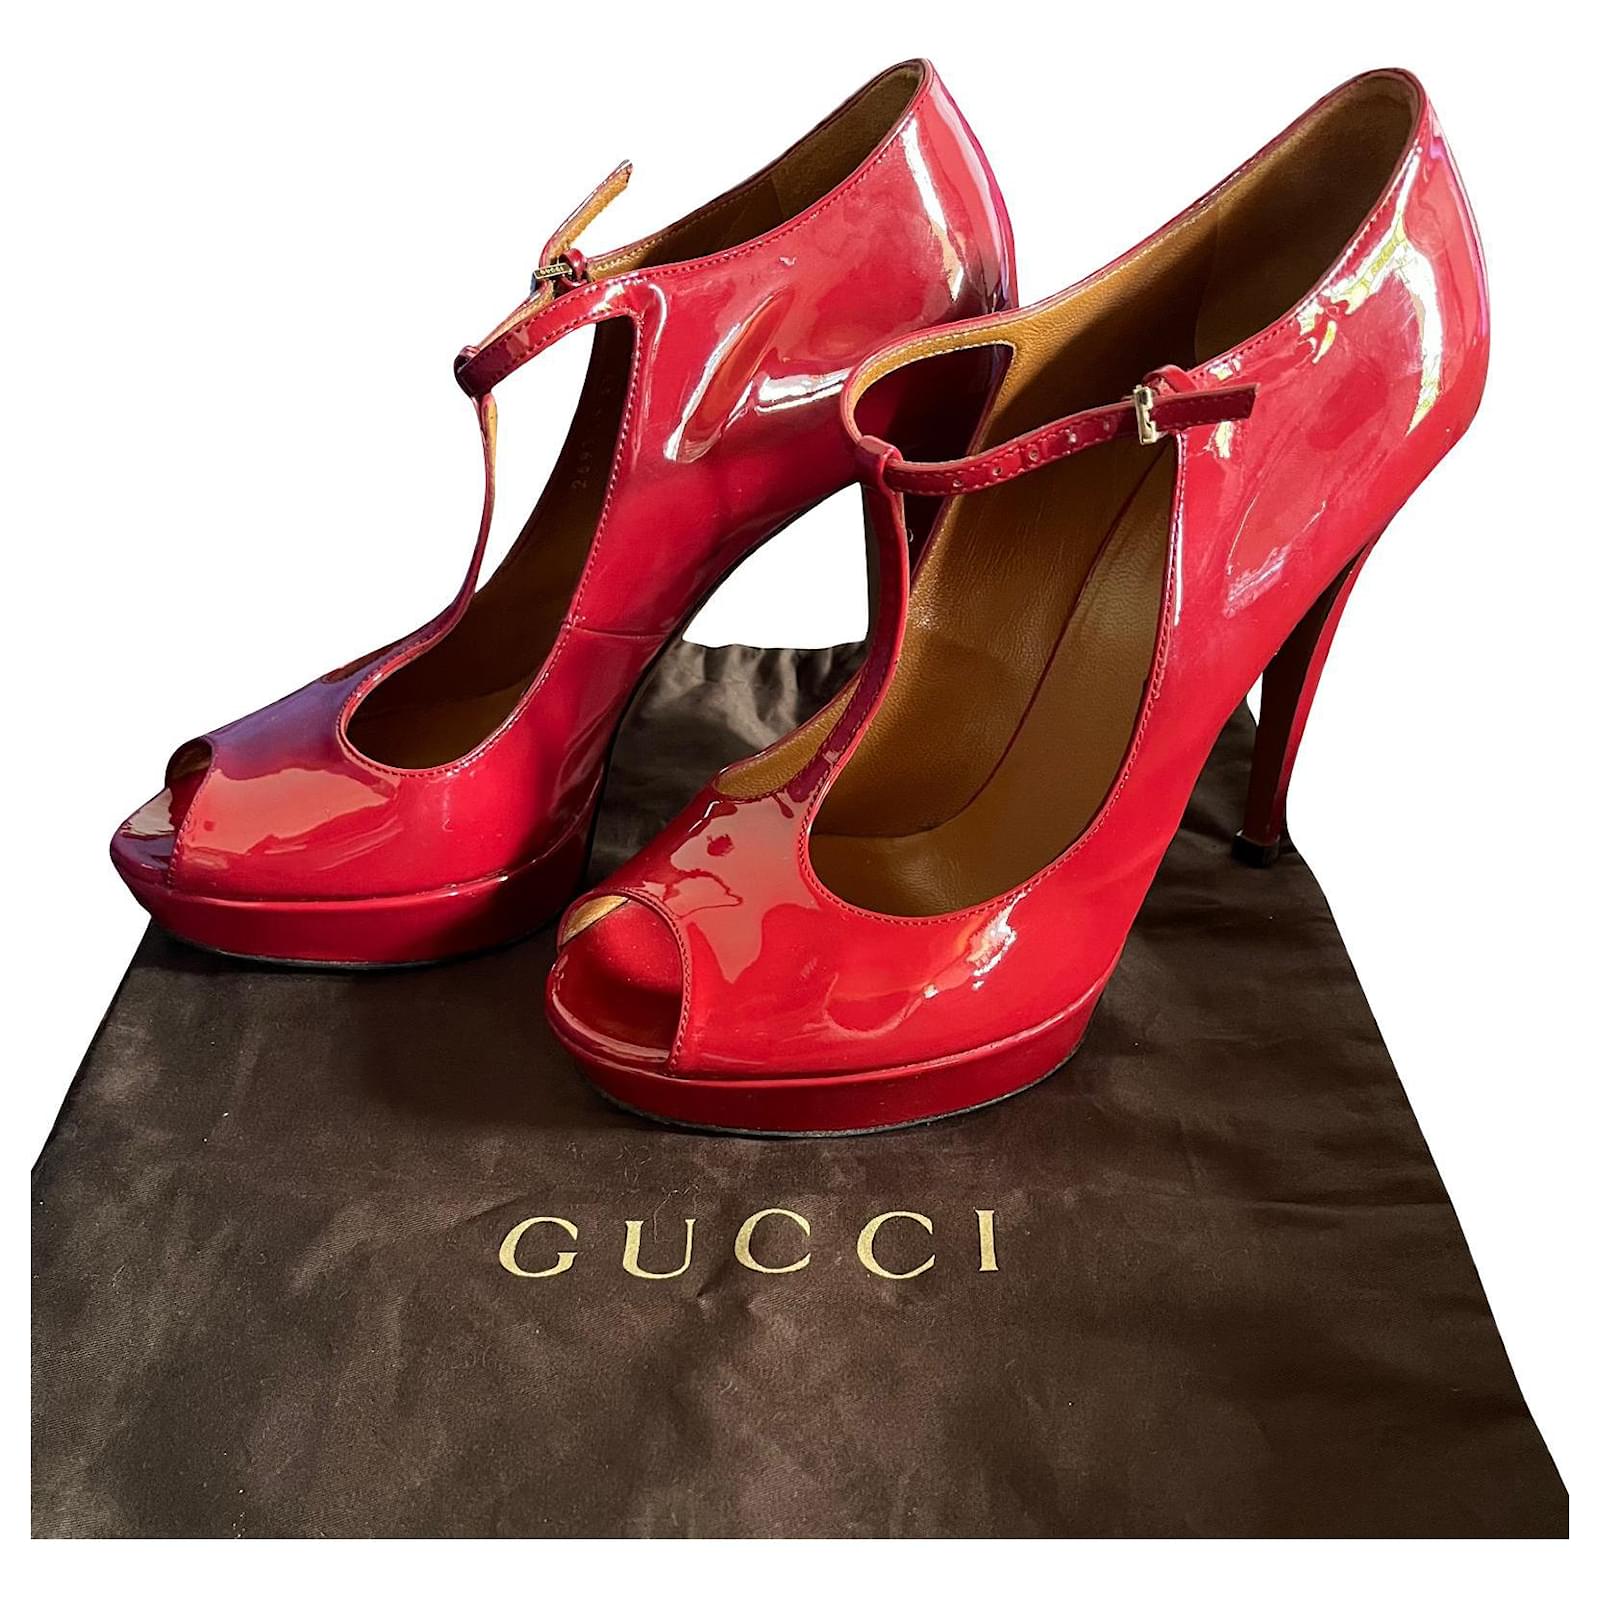 Gucci Red High Heels | peacecommission.kdsg.gov.ng